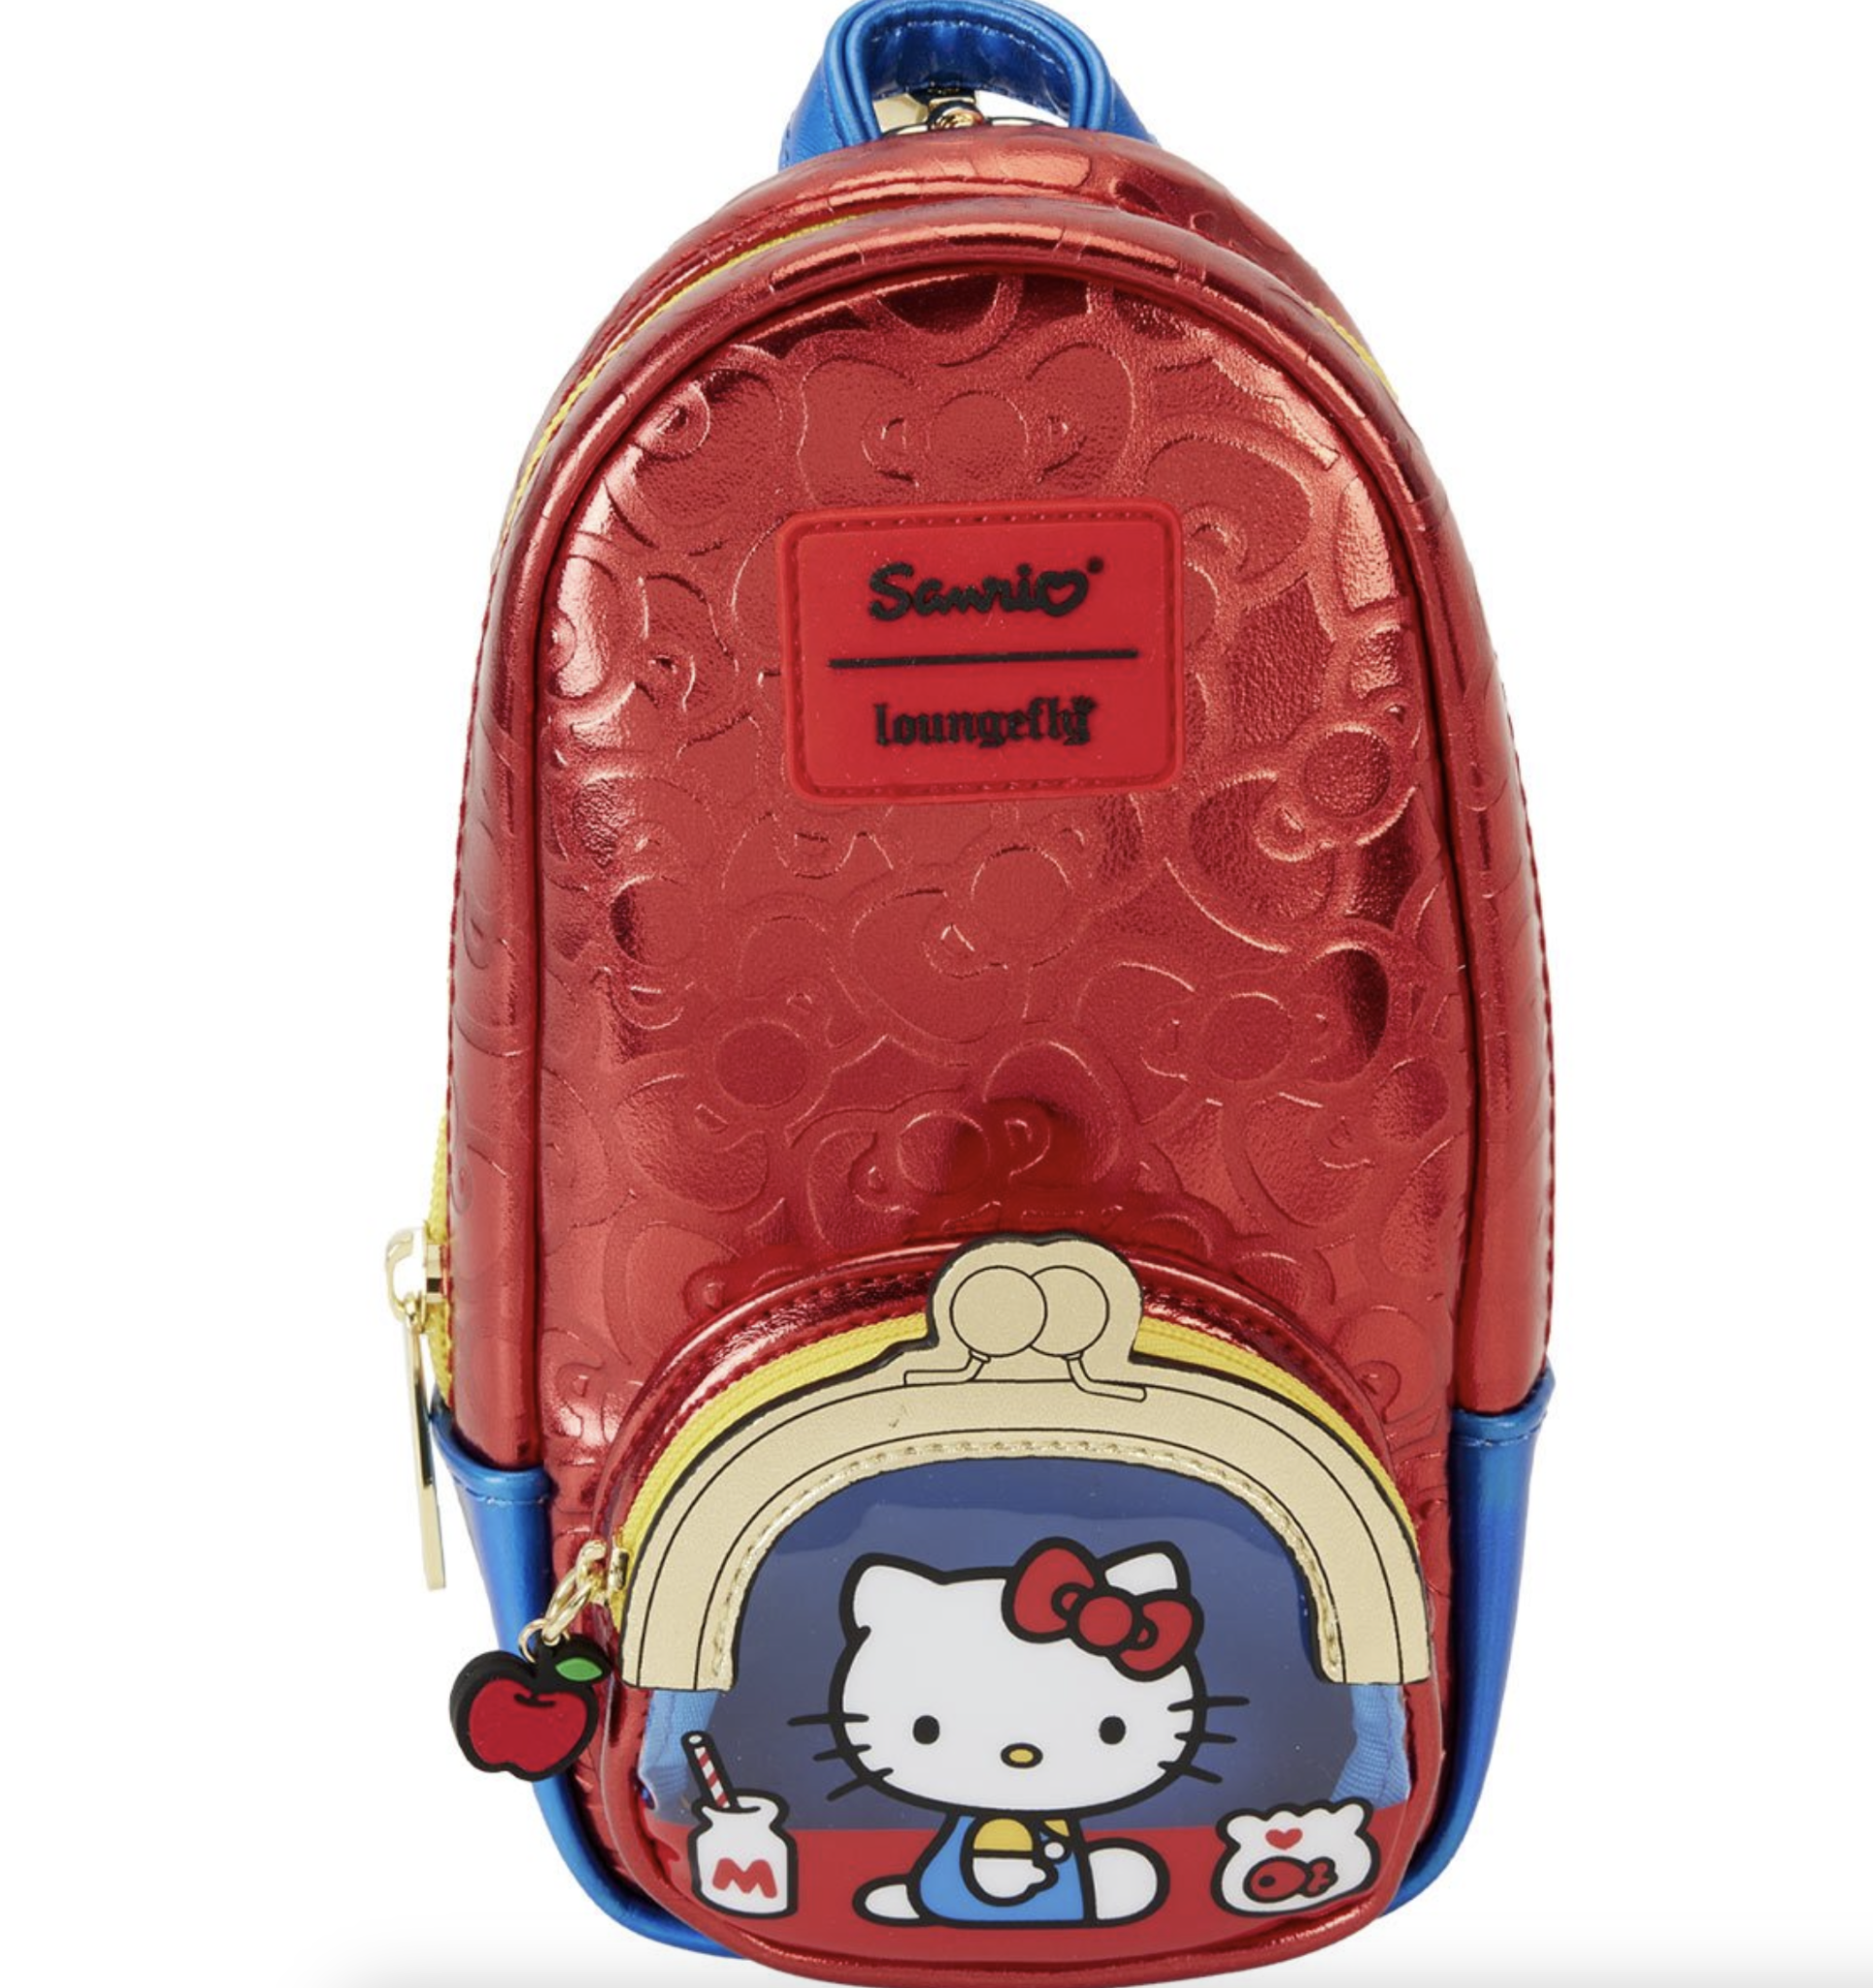 Ida Red Hello Kitty 50th Anniversary Classic Loungefly Mini-Backpack Pencil Case